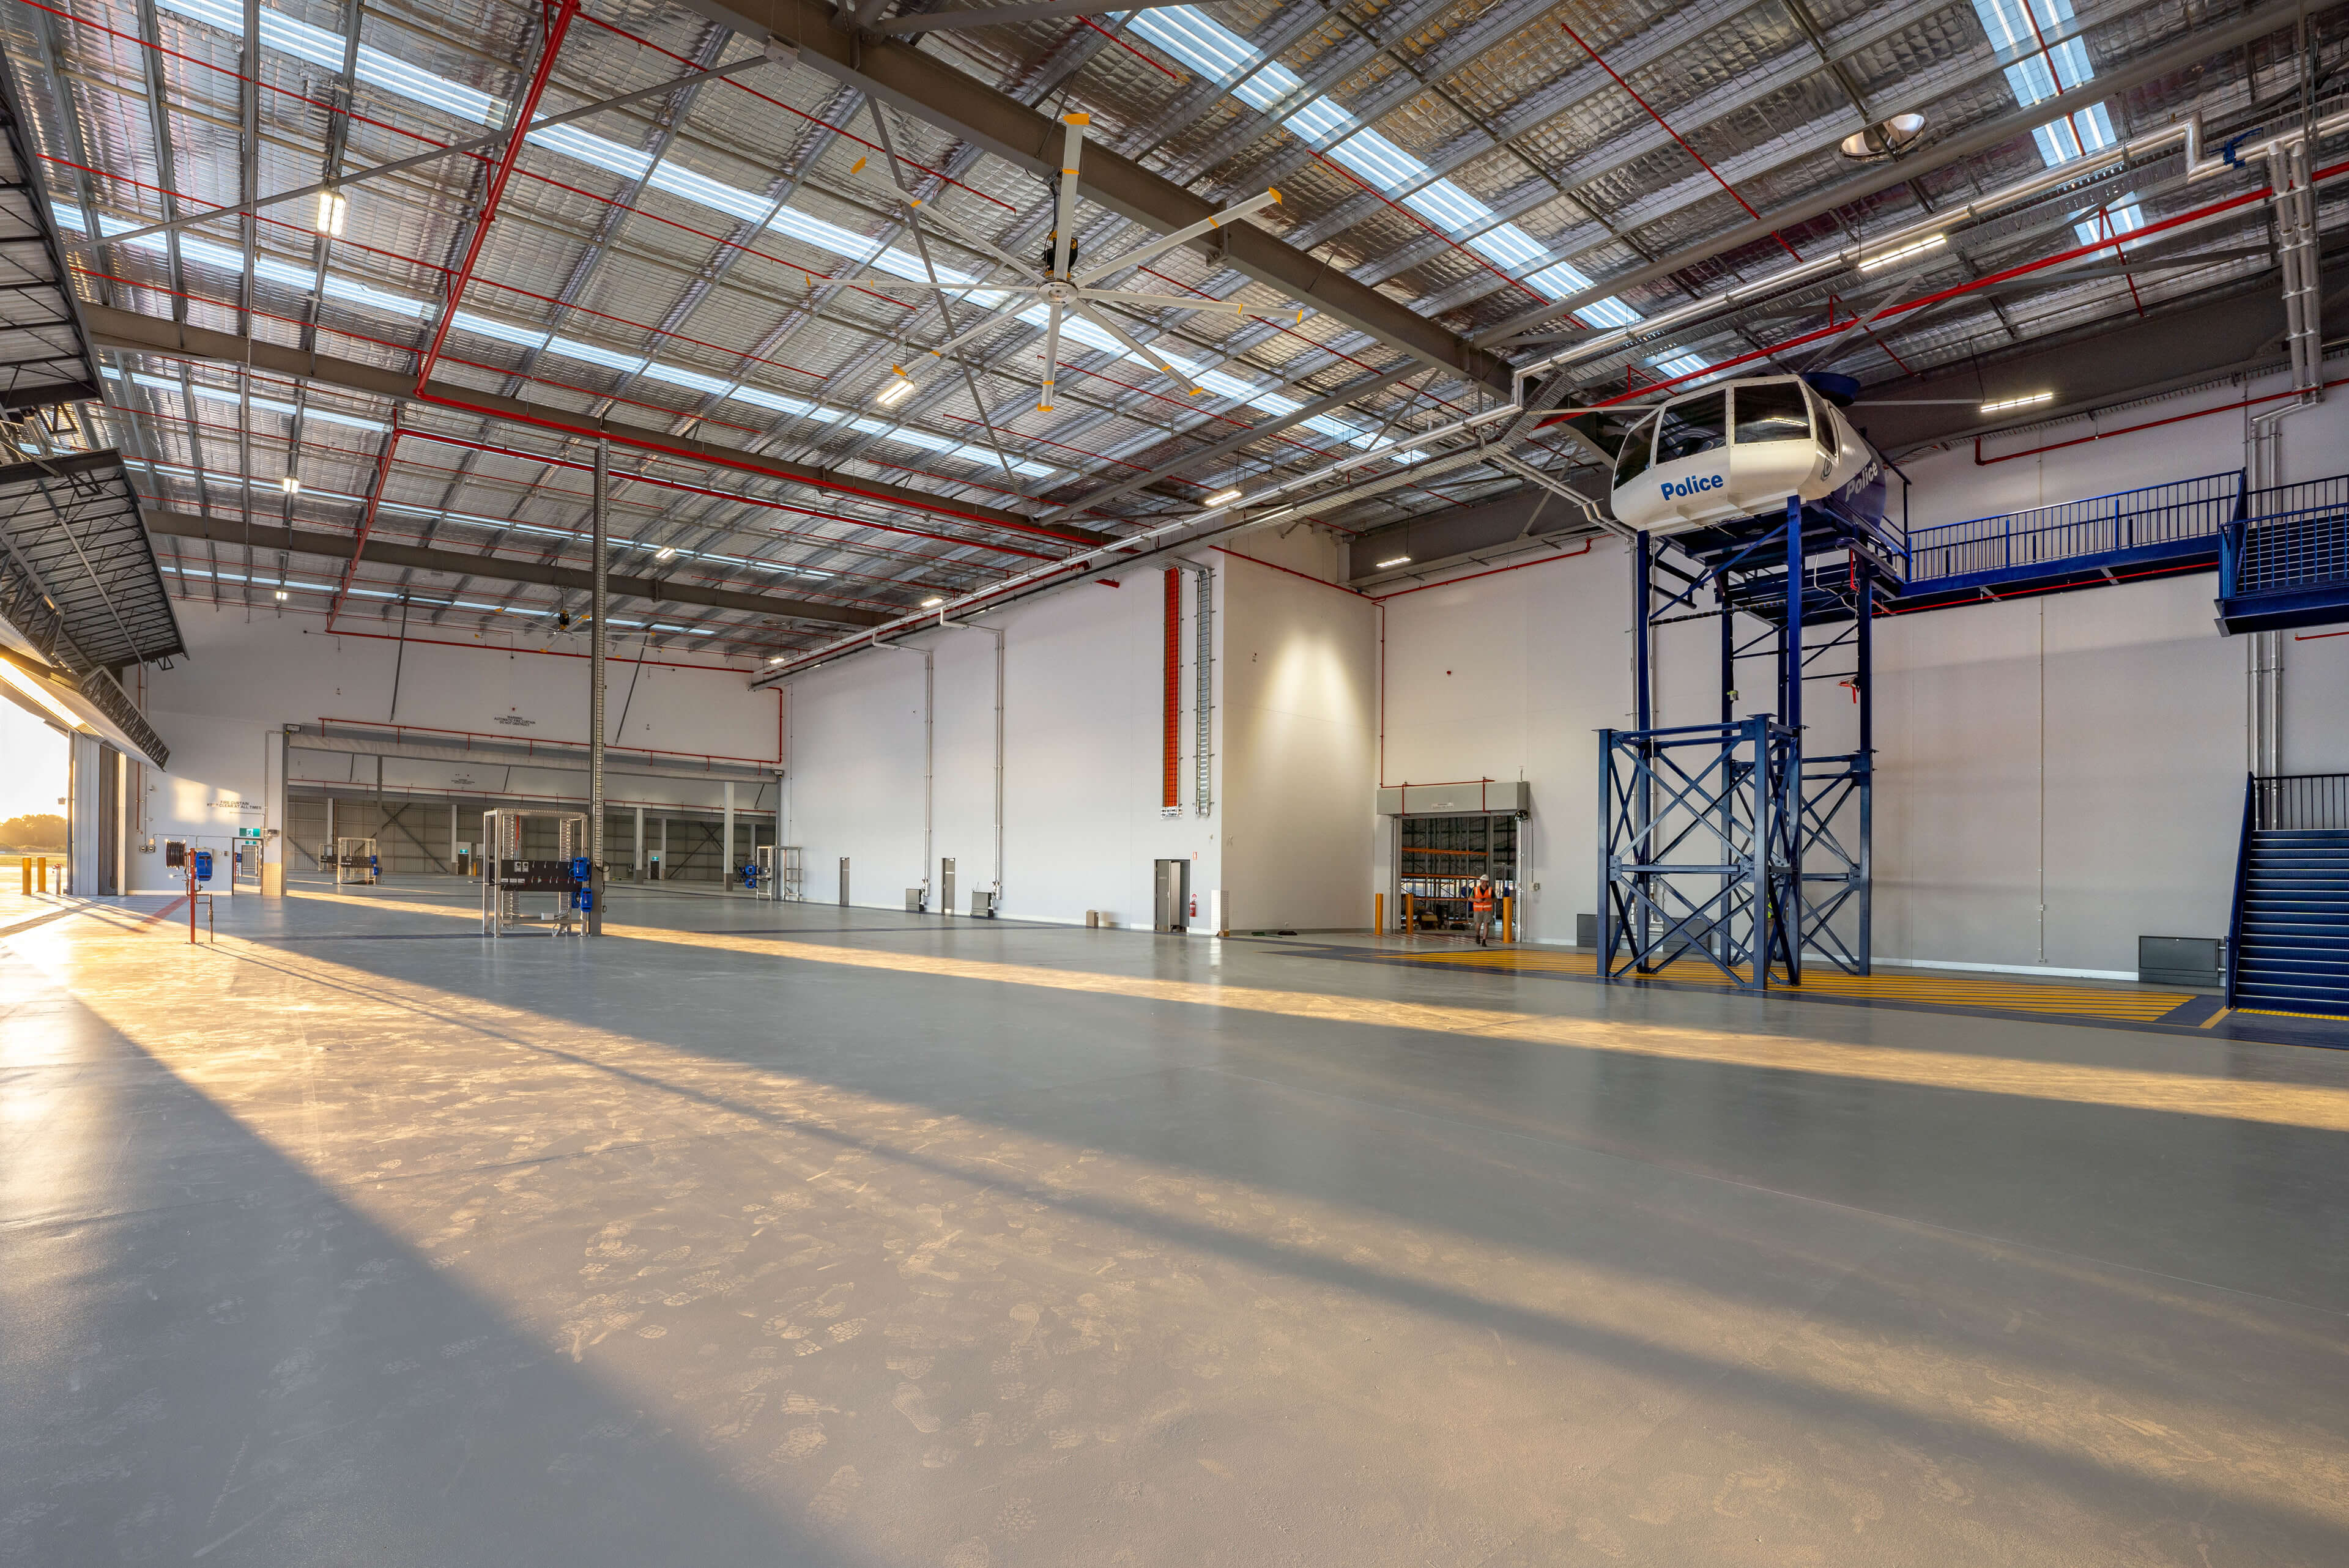 3 helicopter hangar at sunest polair facility bankstown taylor construction refurbishment and live environments